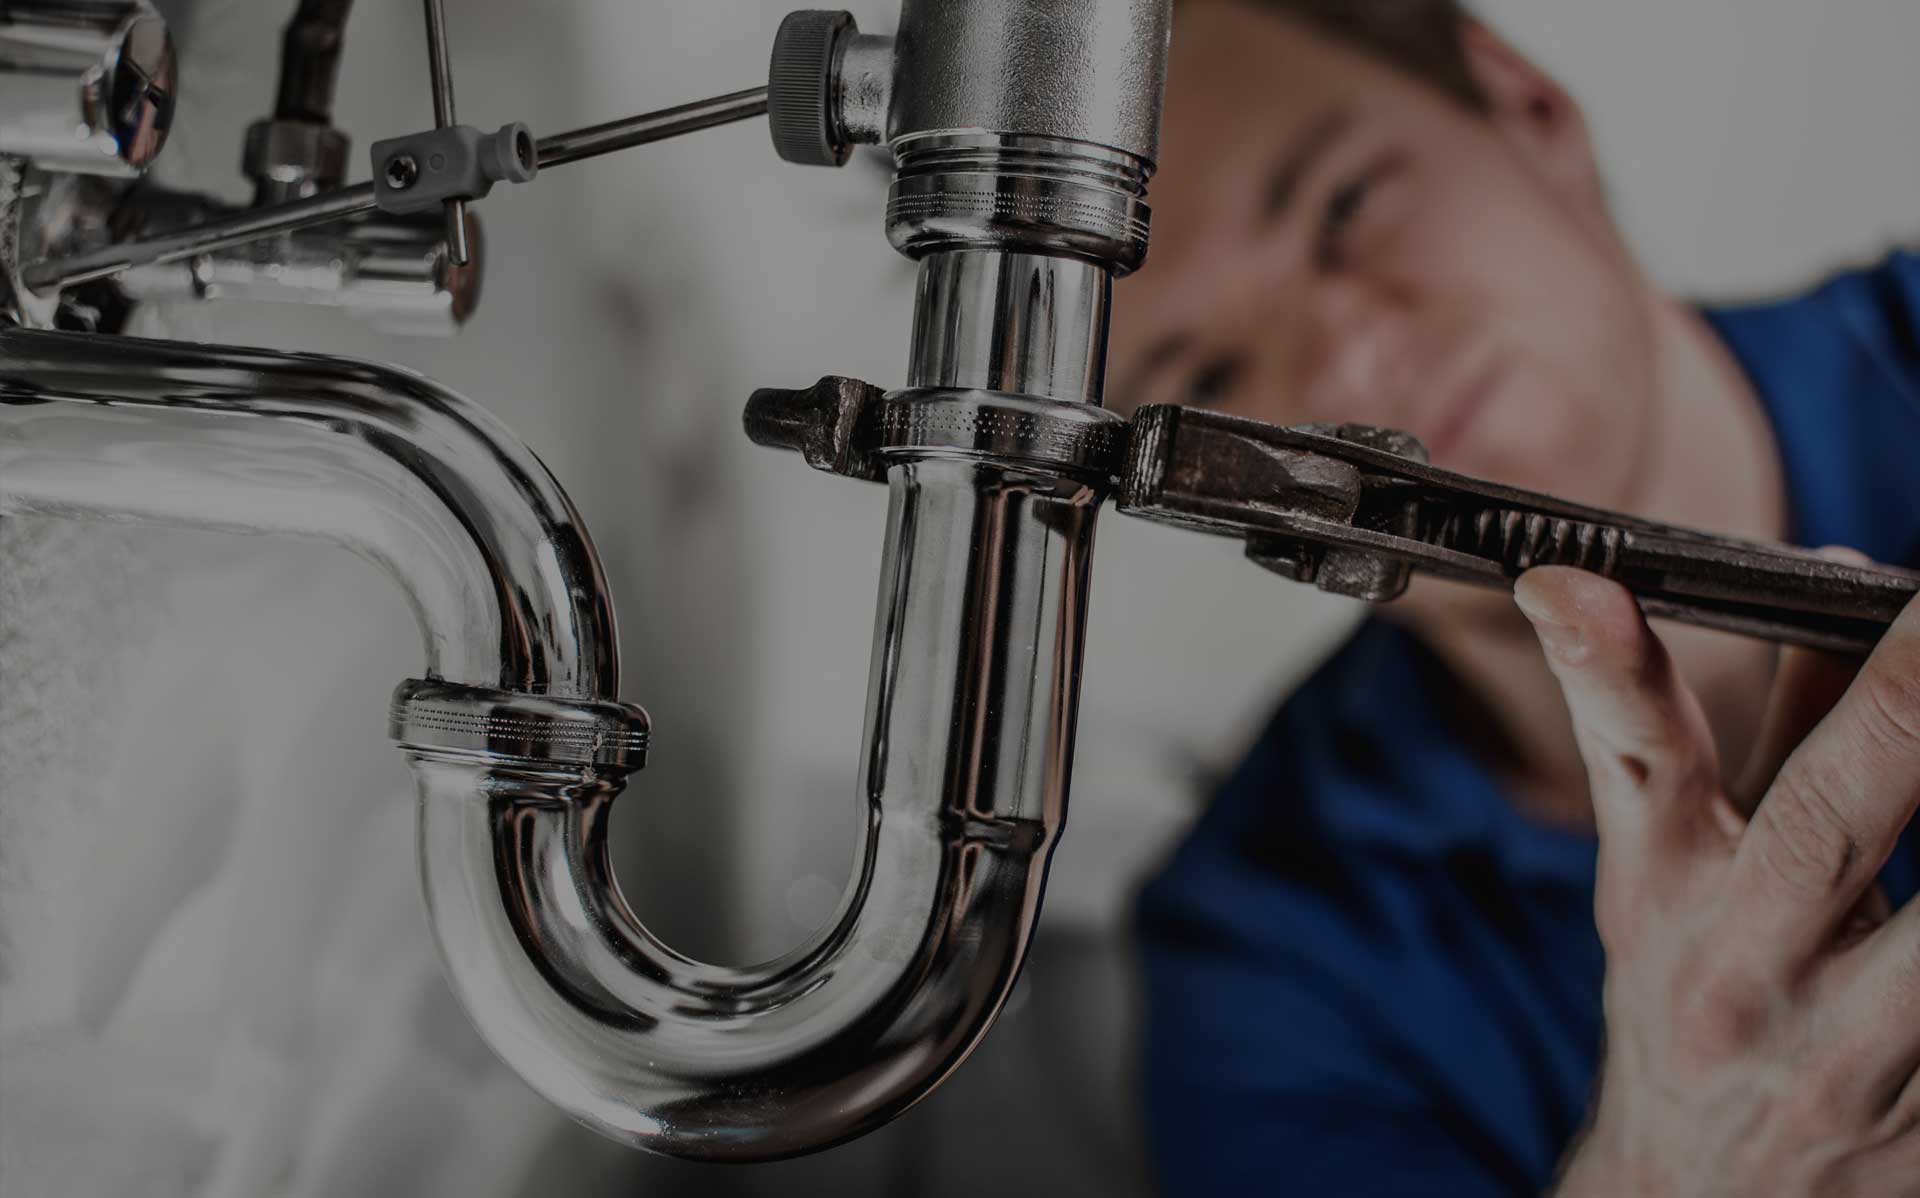 Plumber from Plumbing Company fixing pipe